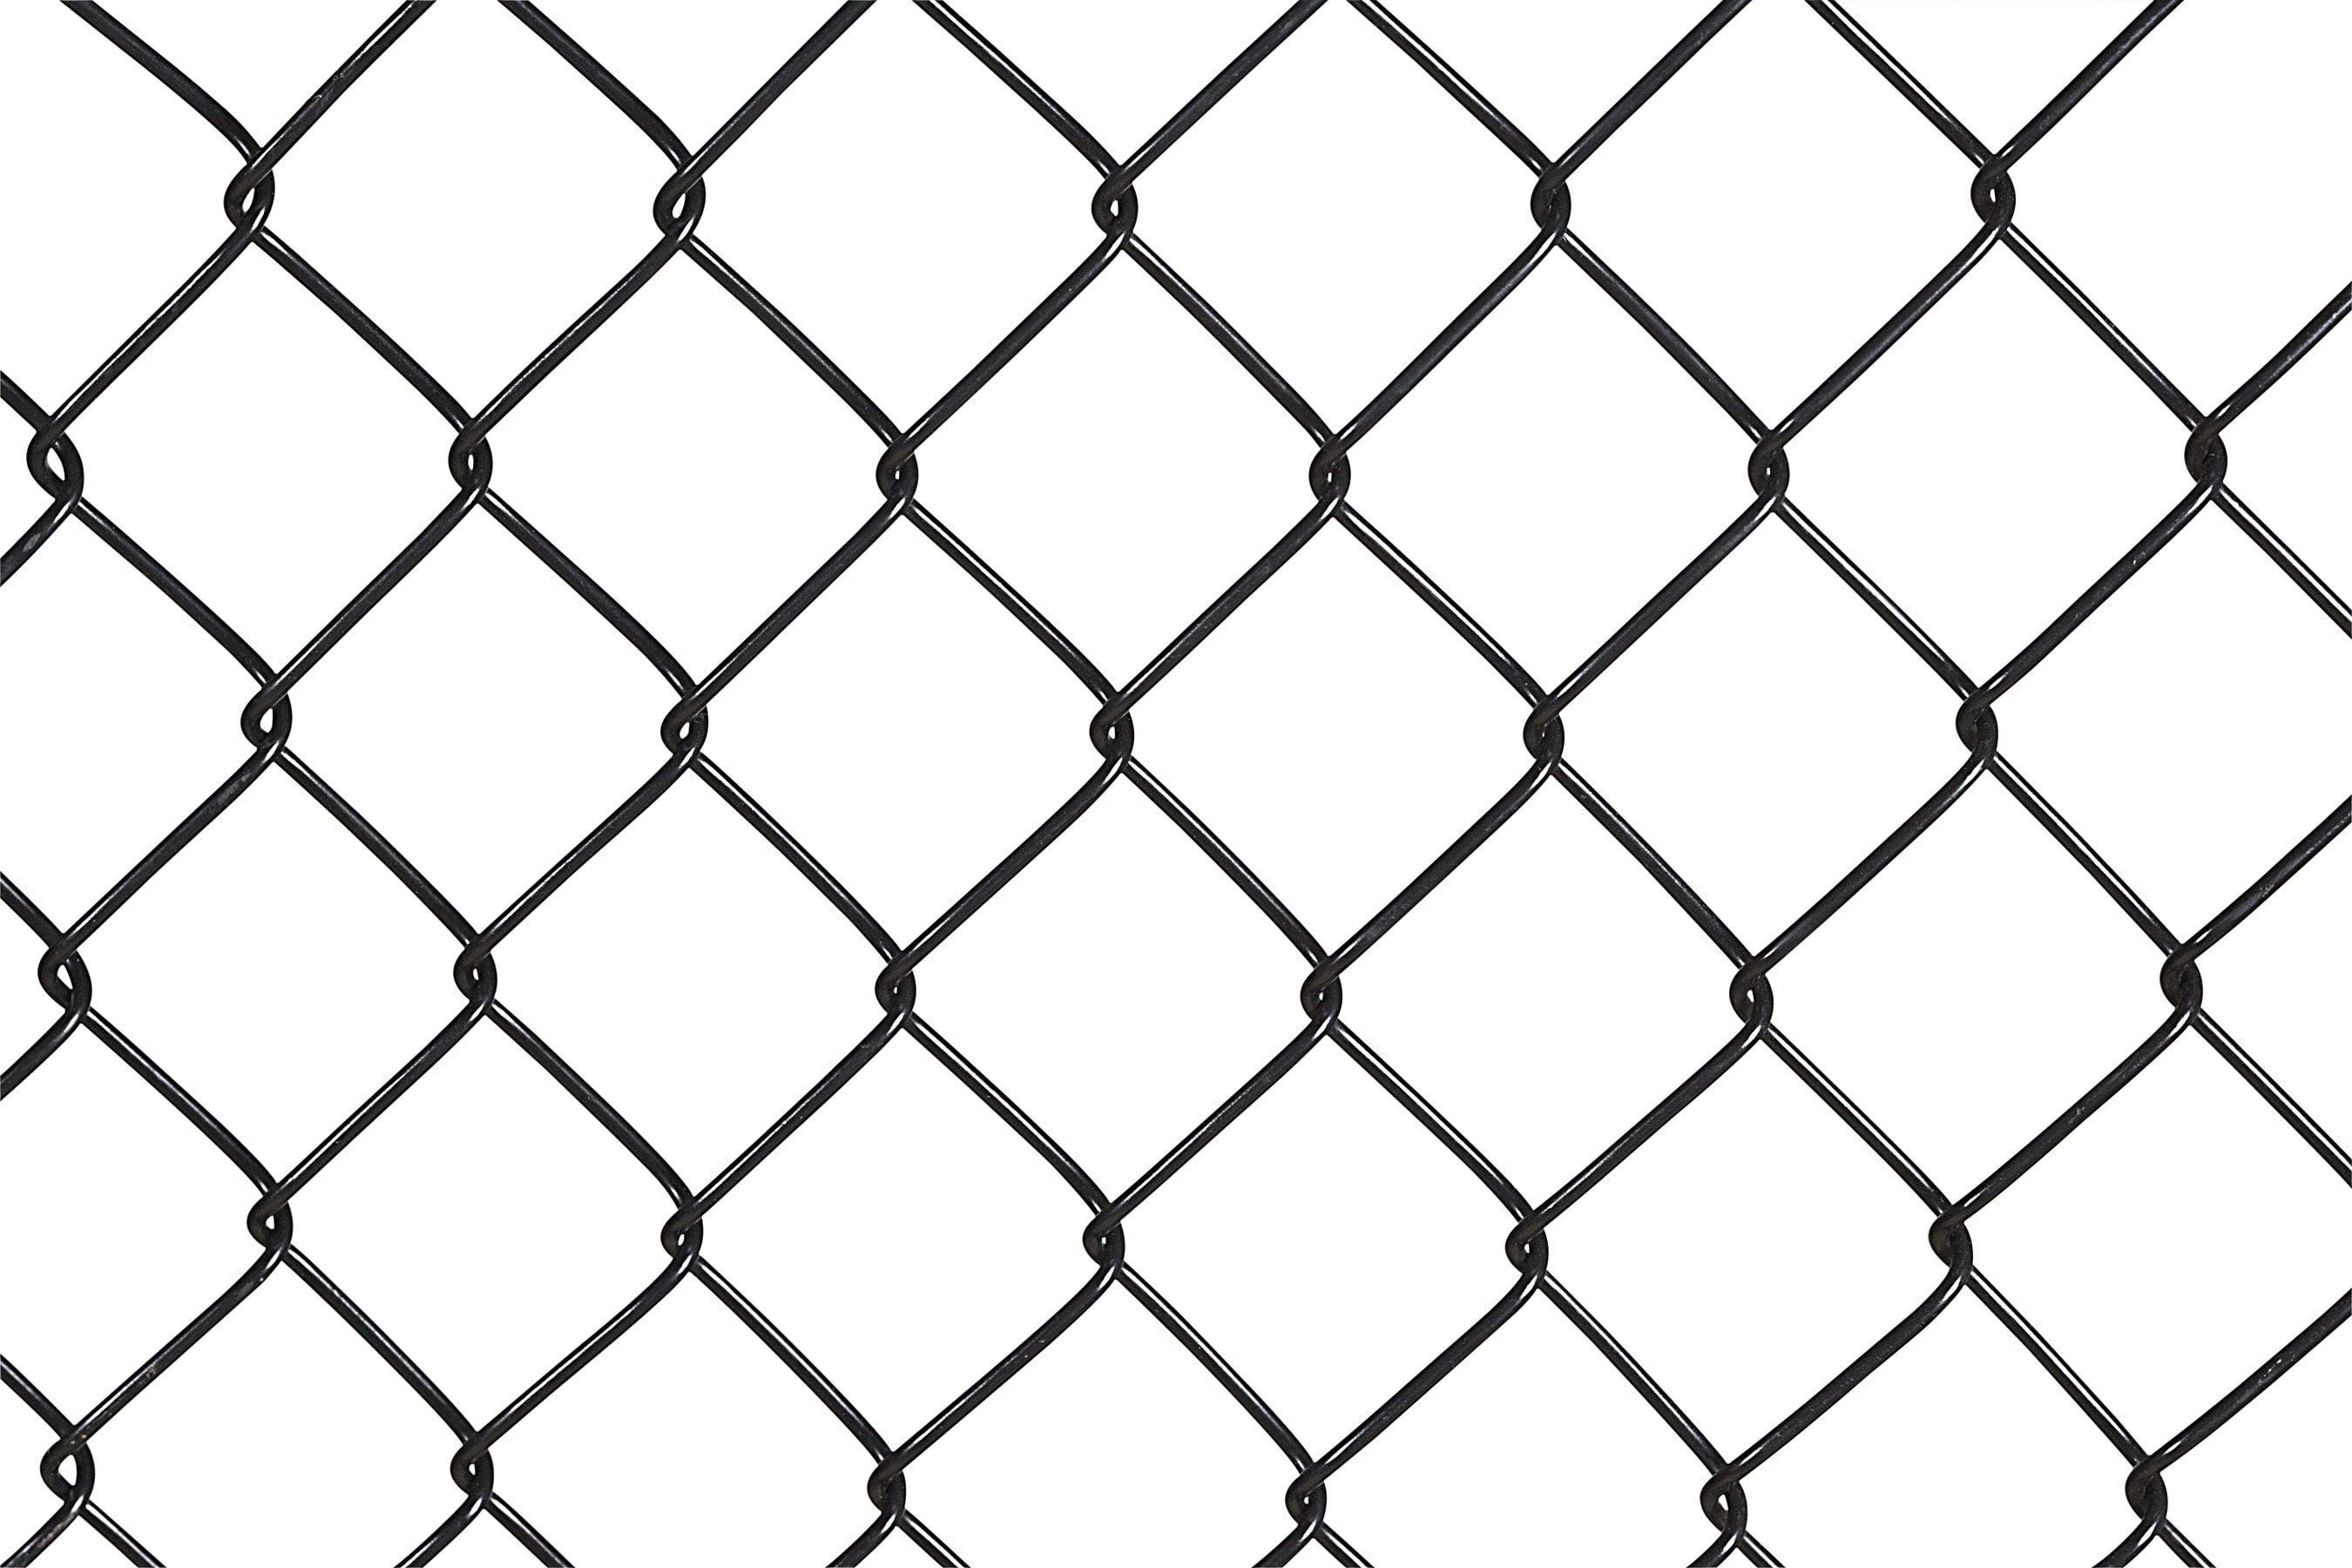 Plastic chain fence signs white and red bound to MT 